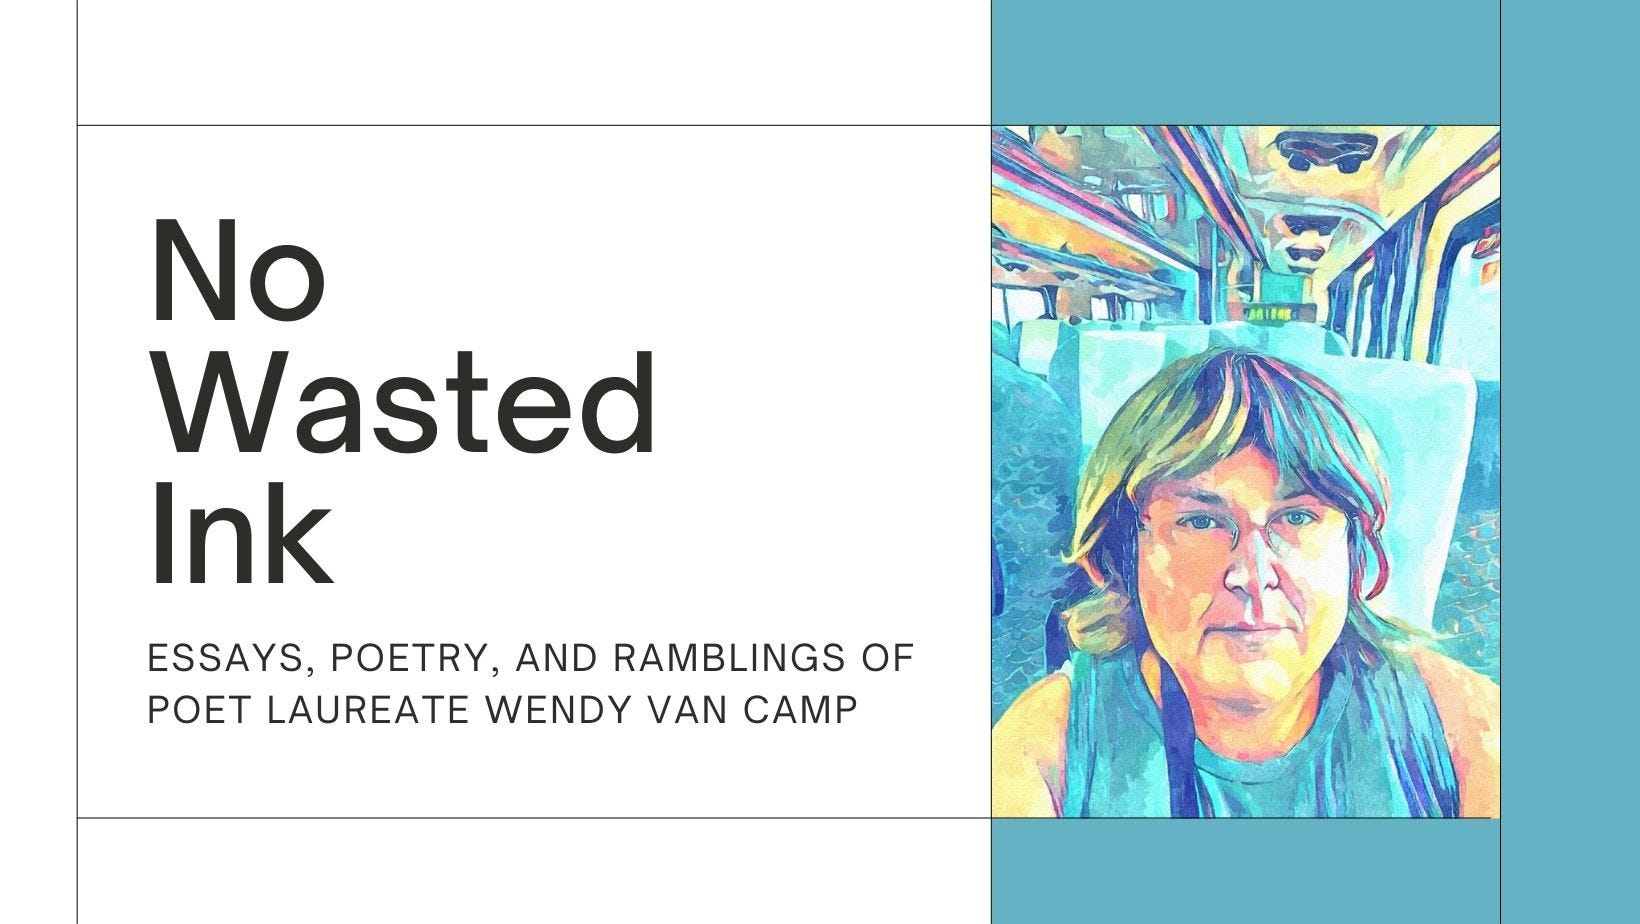 No Wasted Ink Newsletter and Ramblecast by Wendy Van Camp